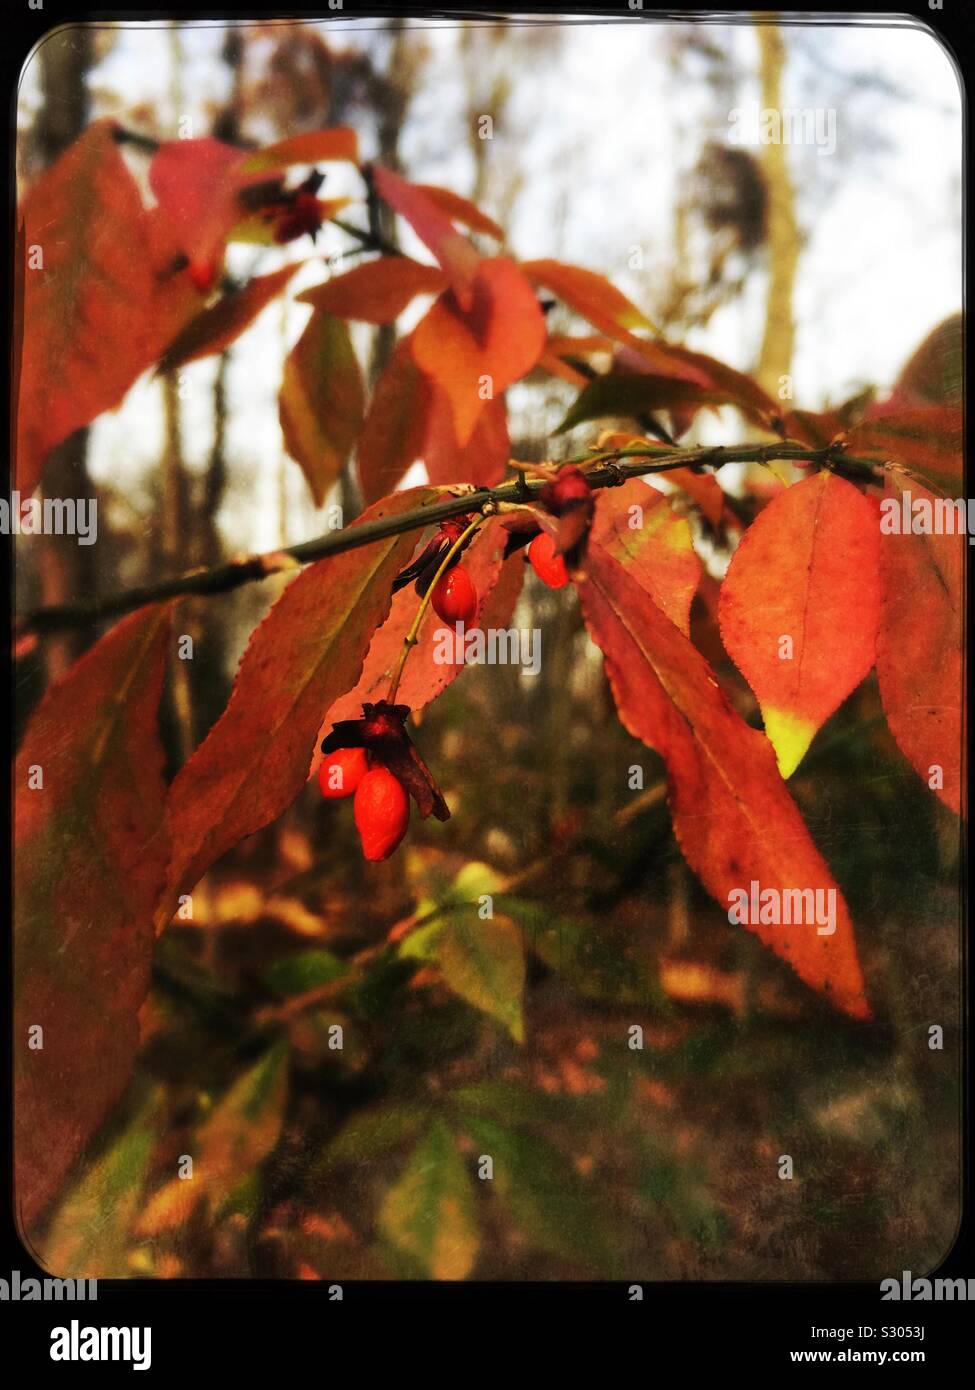 Autumn plant with red berries Stock Photo